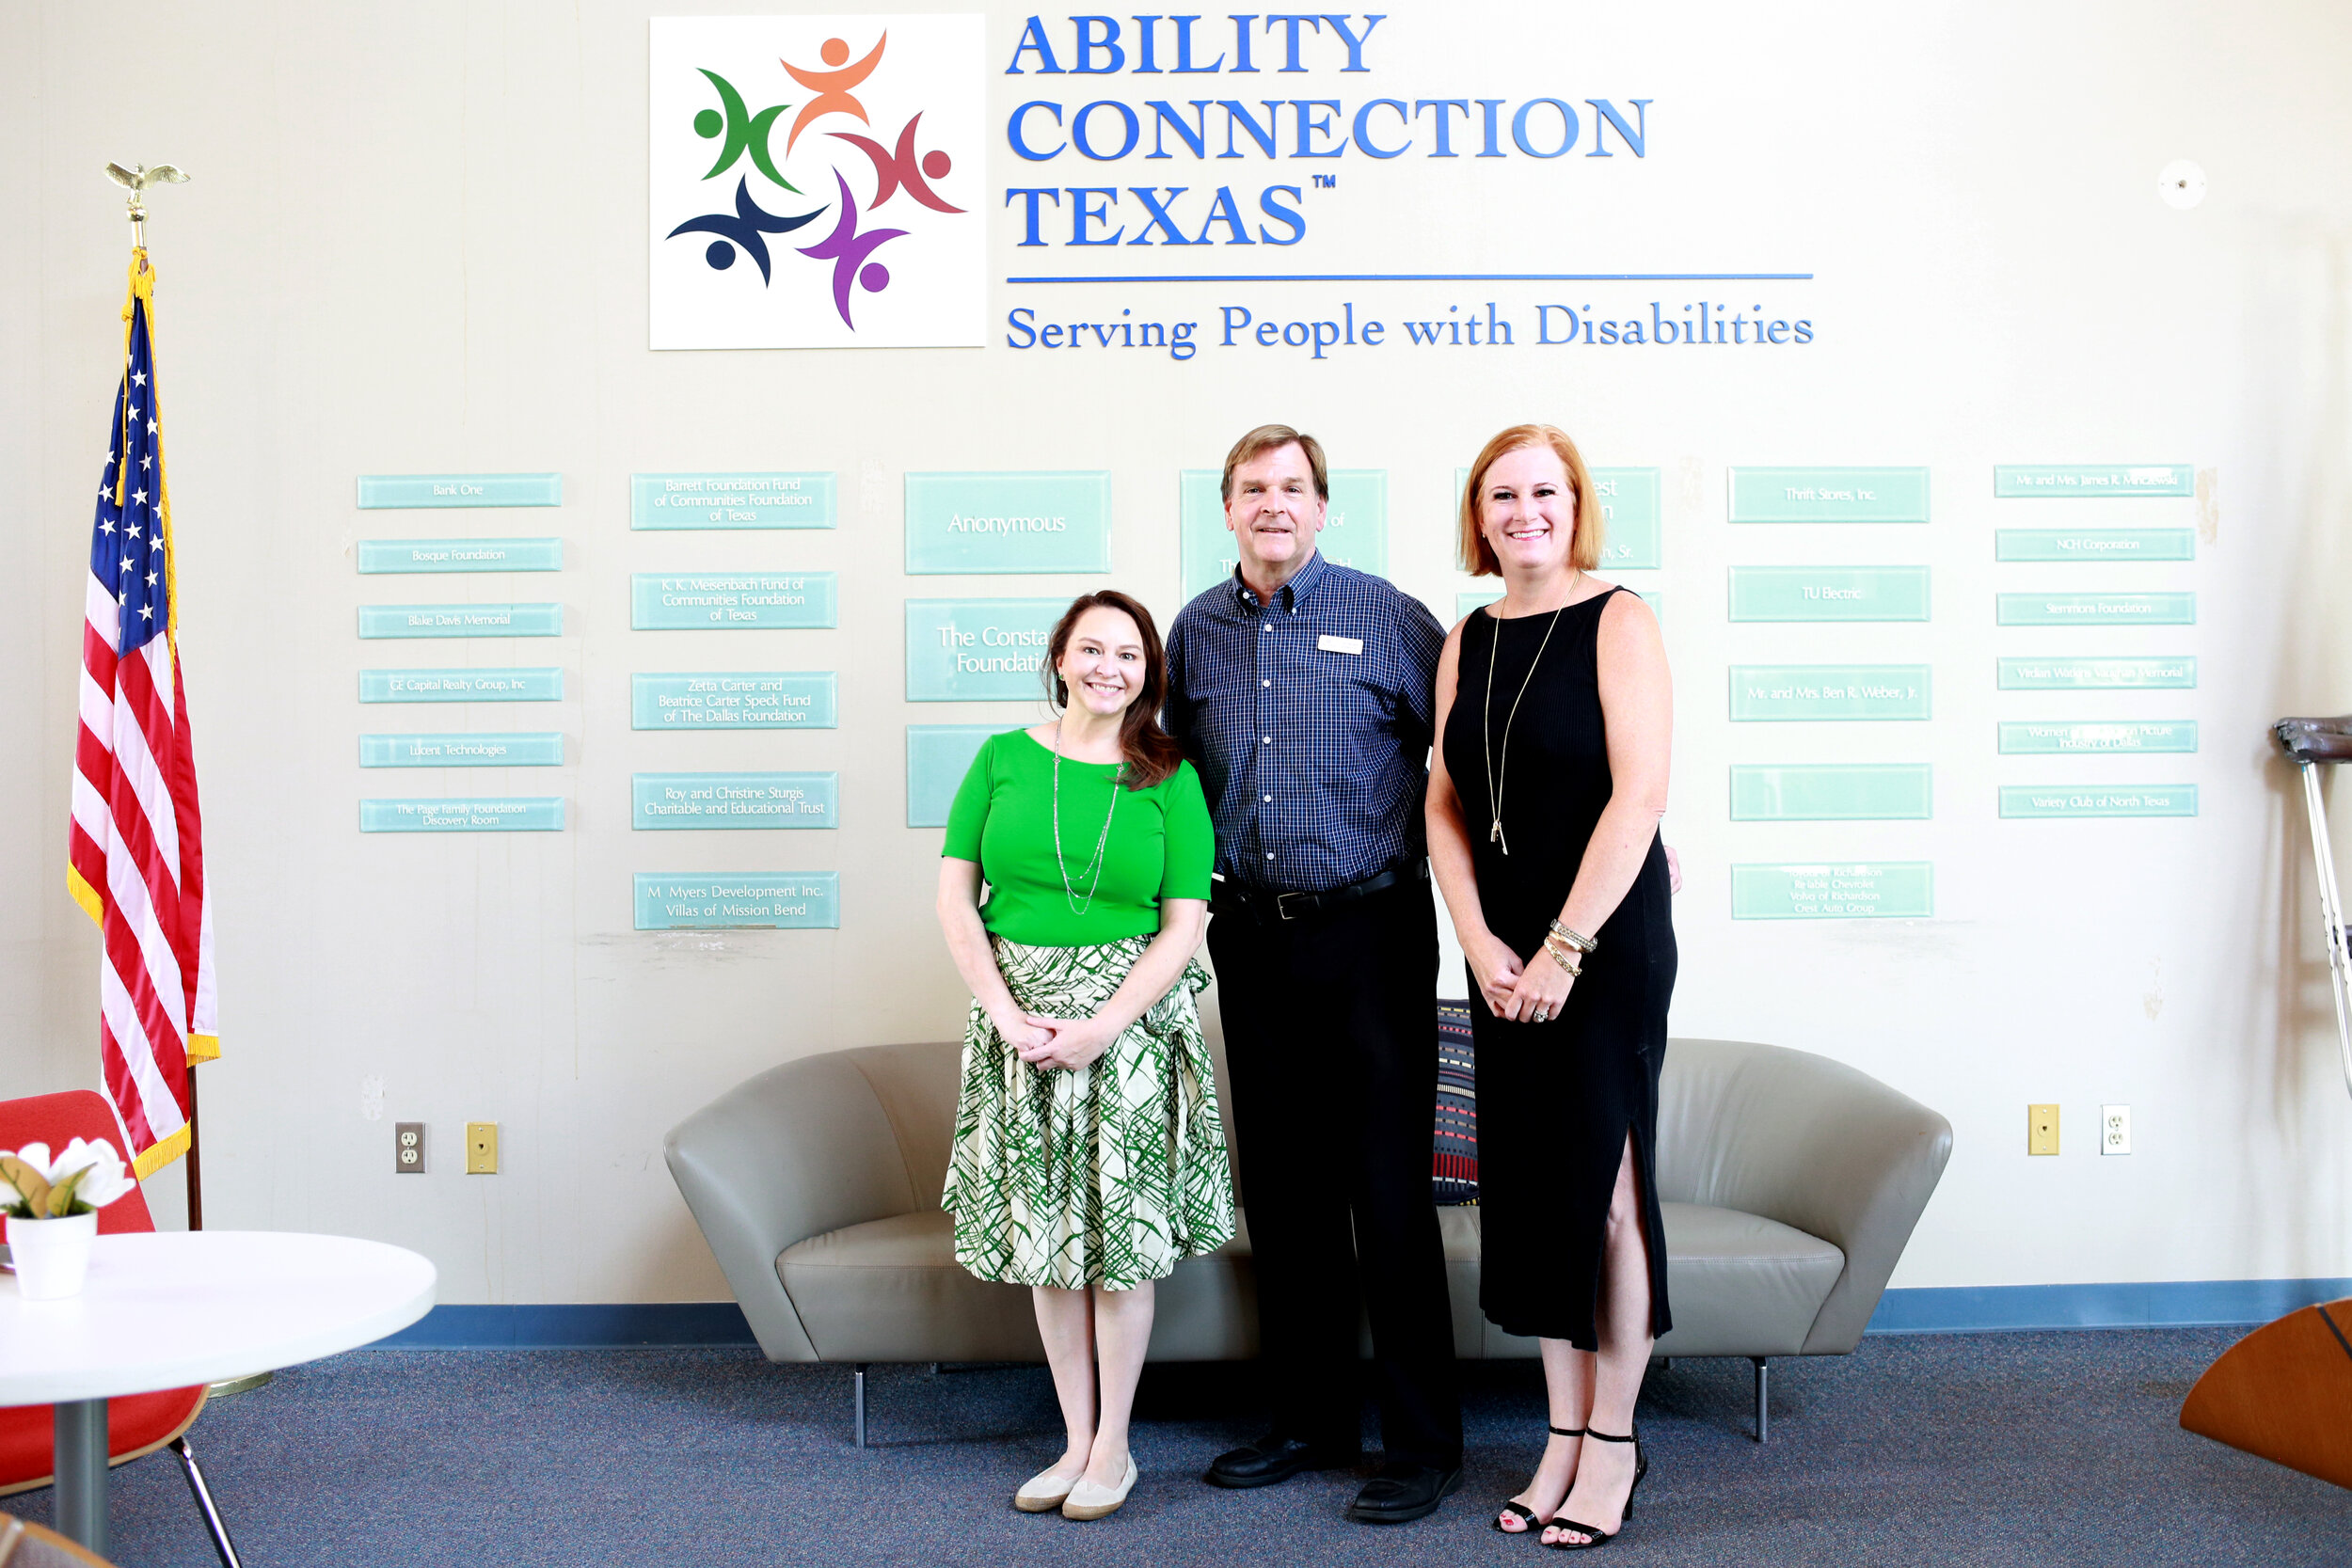 Ability Connection is a 501(c)3 nonprofit organization with a mission to enrich the lives of people with disabilities...one person at a time. Ability Connection is committed to providing people with disabilities comprehensive life changing care, tra…